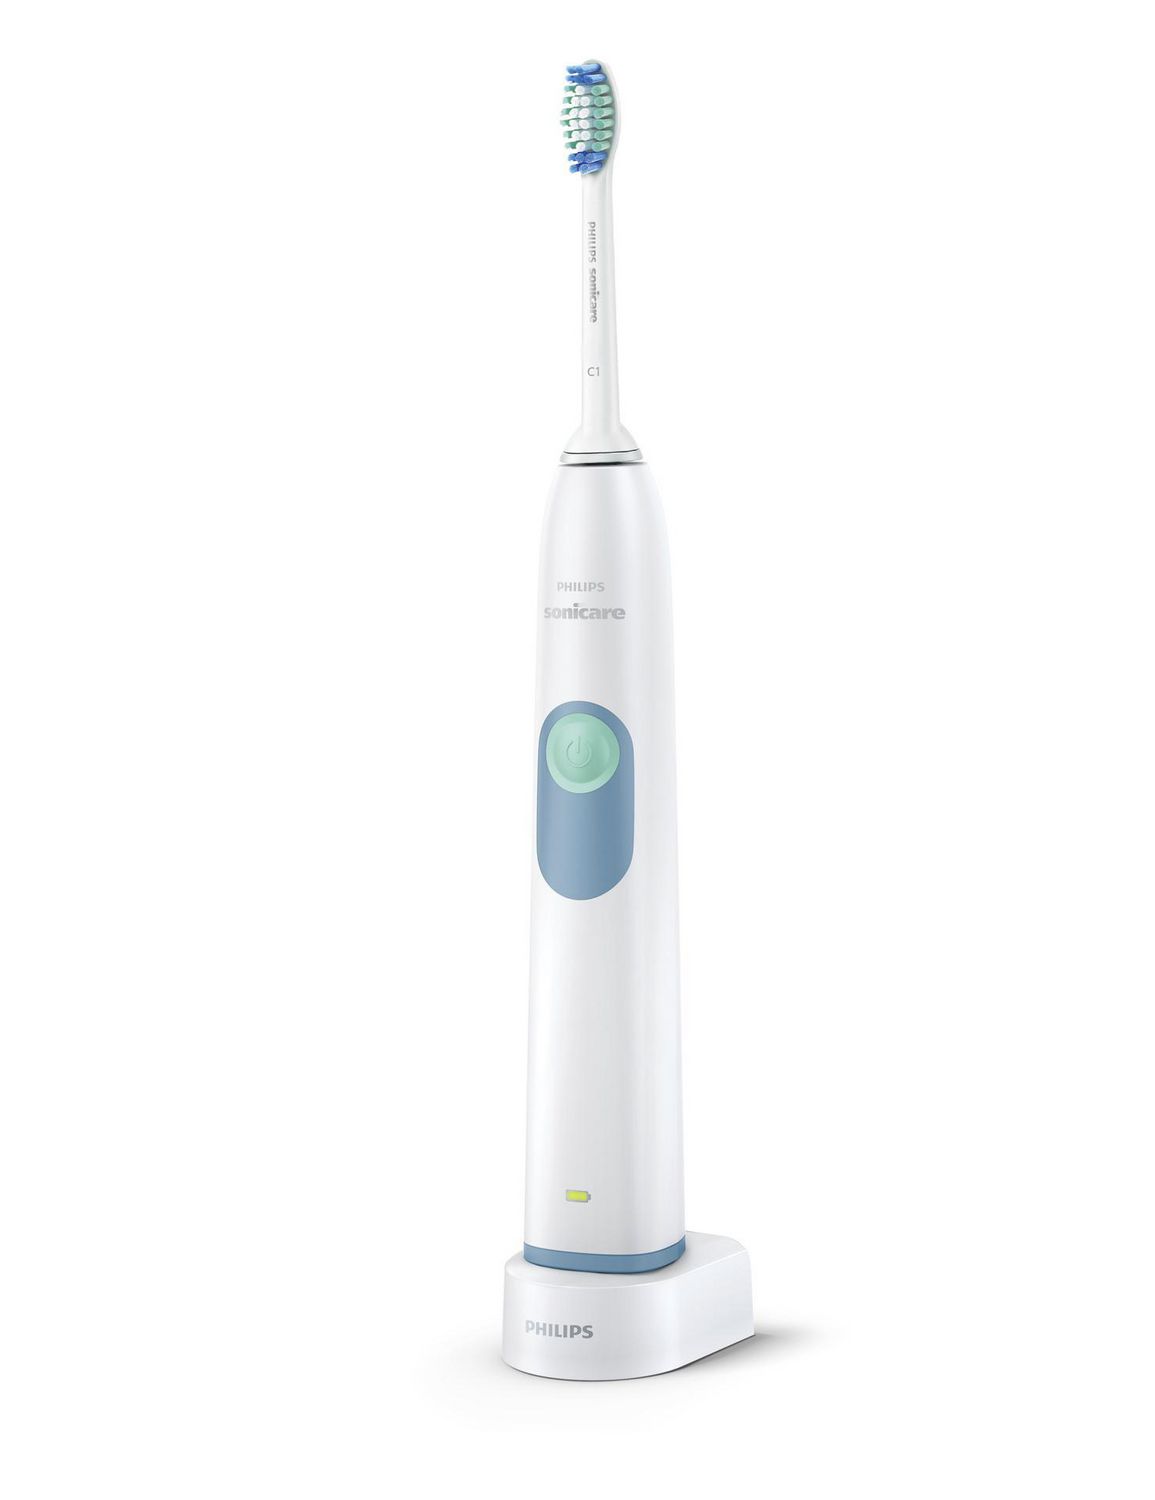 Philips Sonicare DailyClean 3100 Sonic electric toothbrush HX6211/55